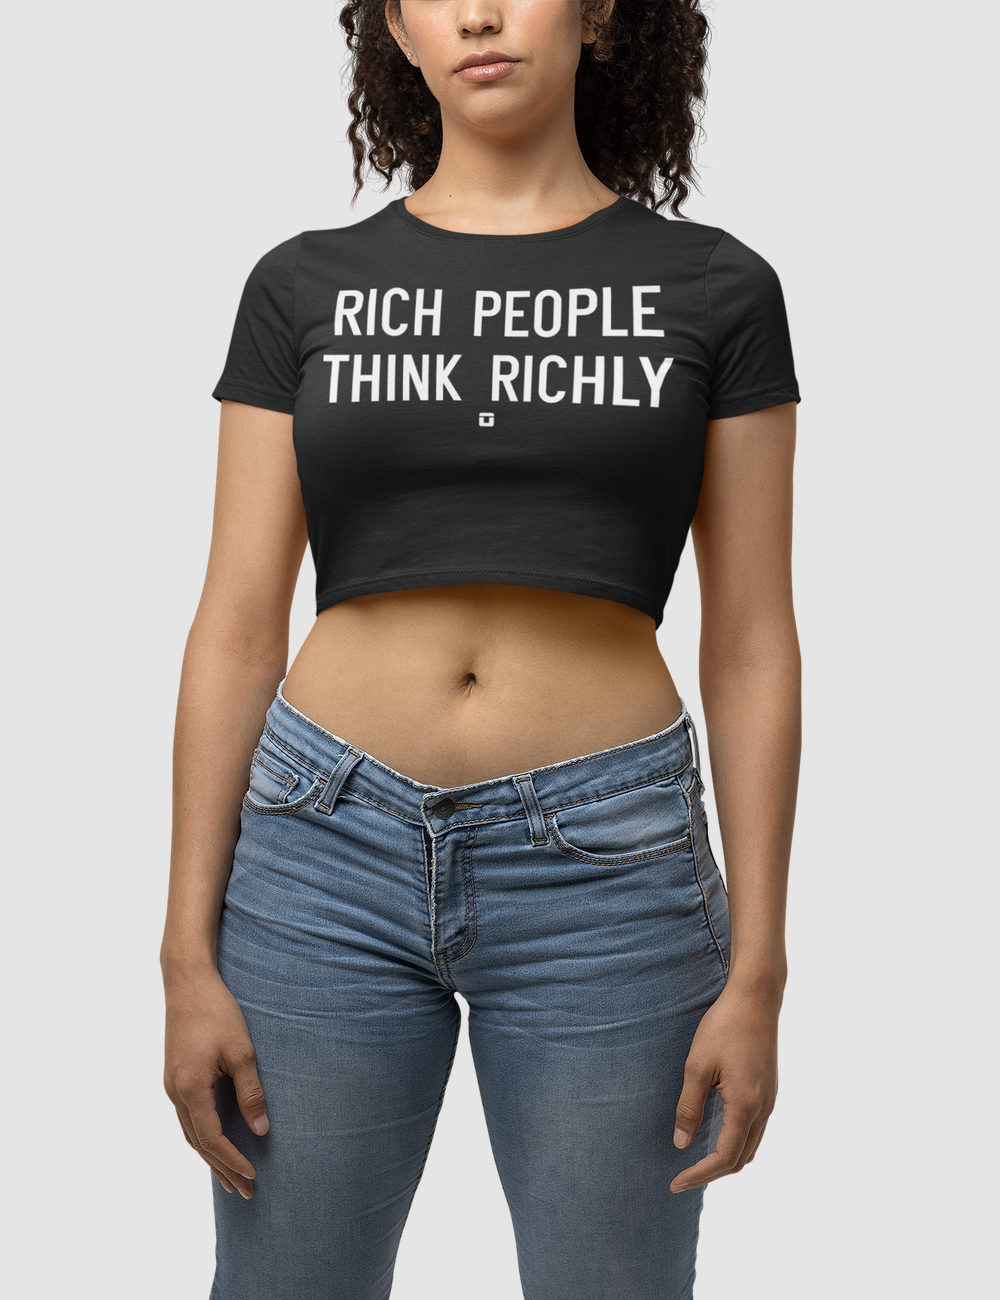 Rich People Think Richly Women's Fitted Crop Top T-Shirt OniTakai